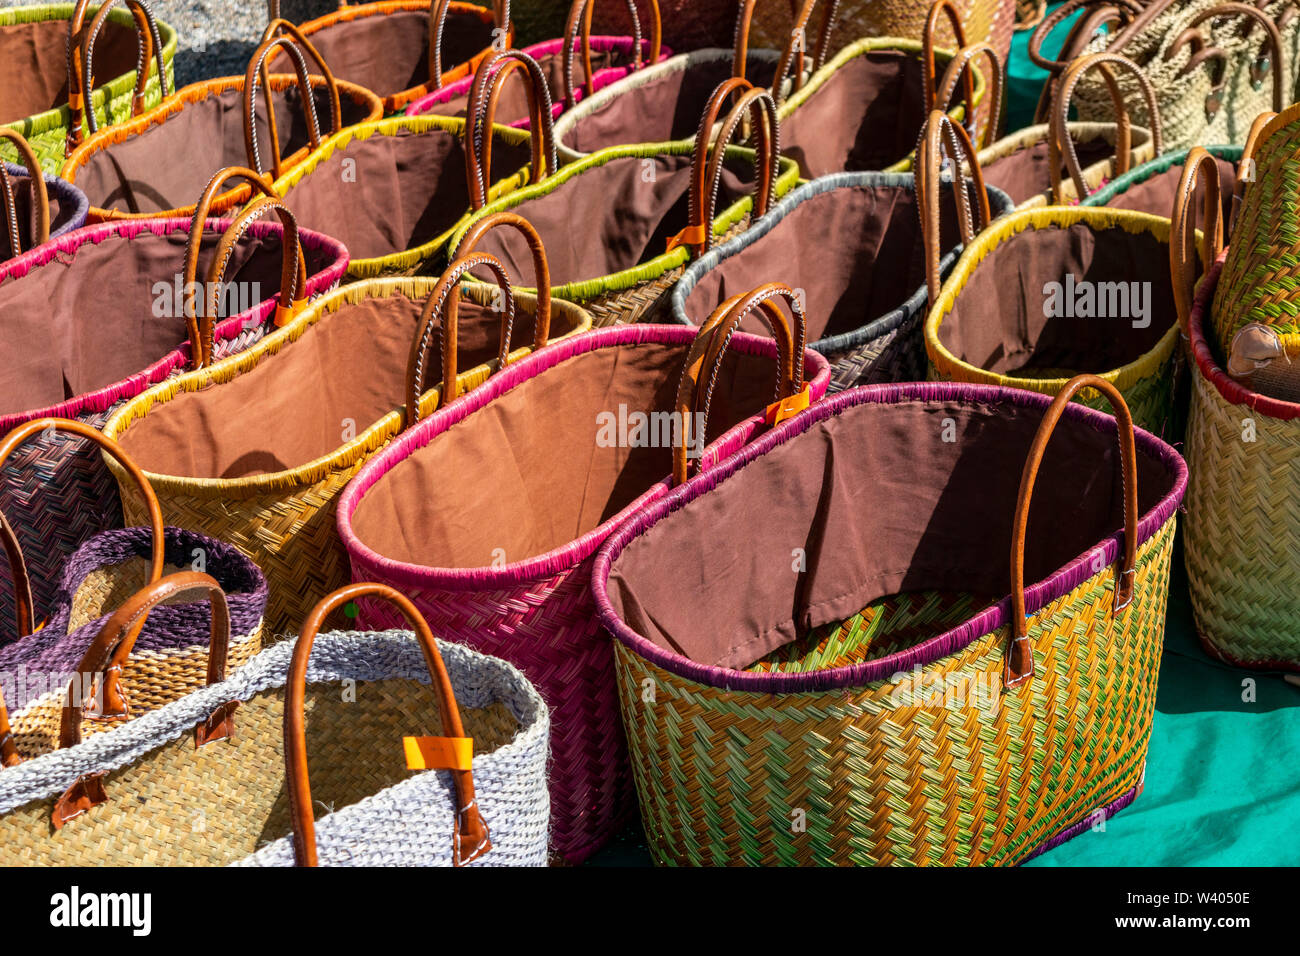 A display of colourful handmade wicker baskets for sale in a French market suitable for carrying shopping Stock Photo